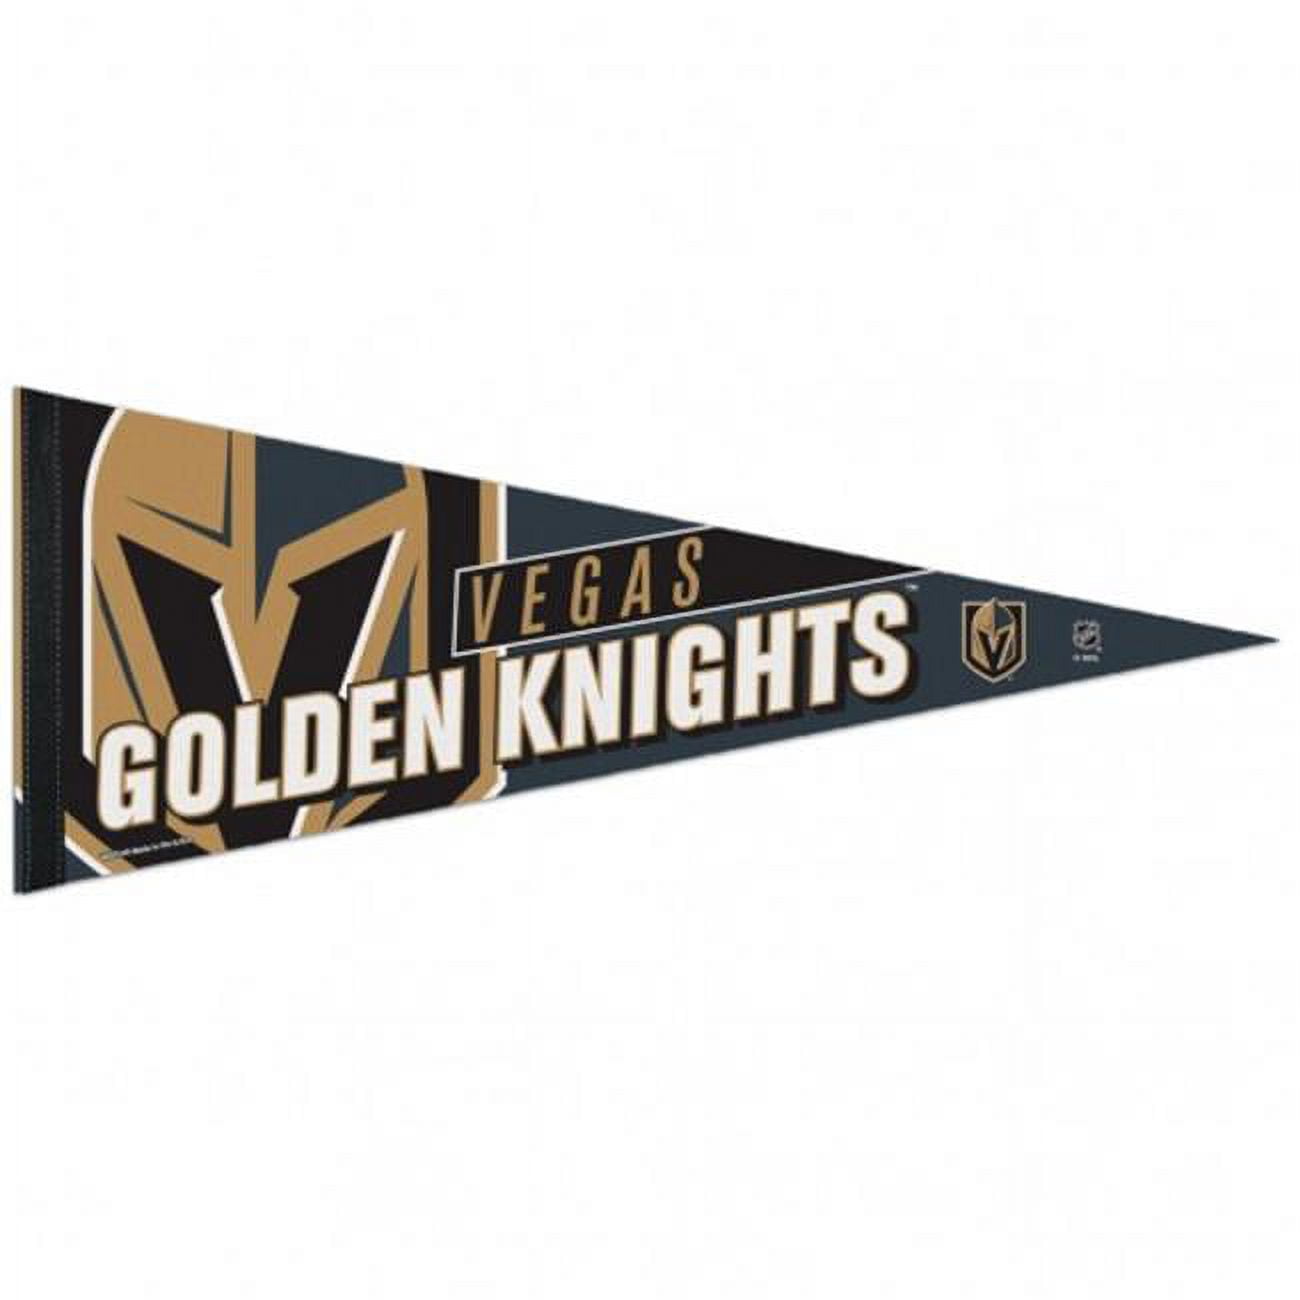 Picture of Vegas Golden Knights Pennant 12x30 Premium Style